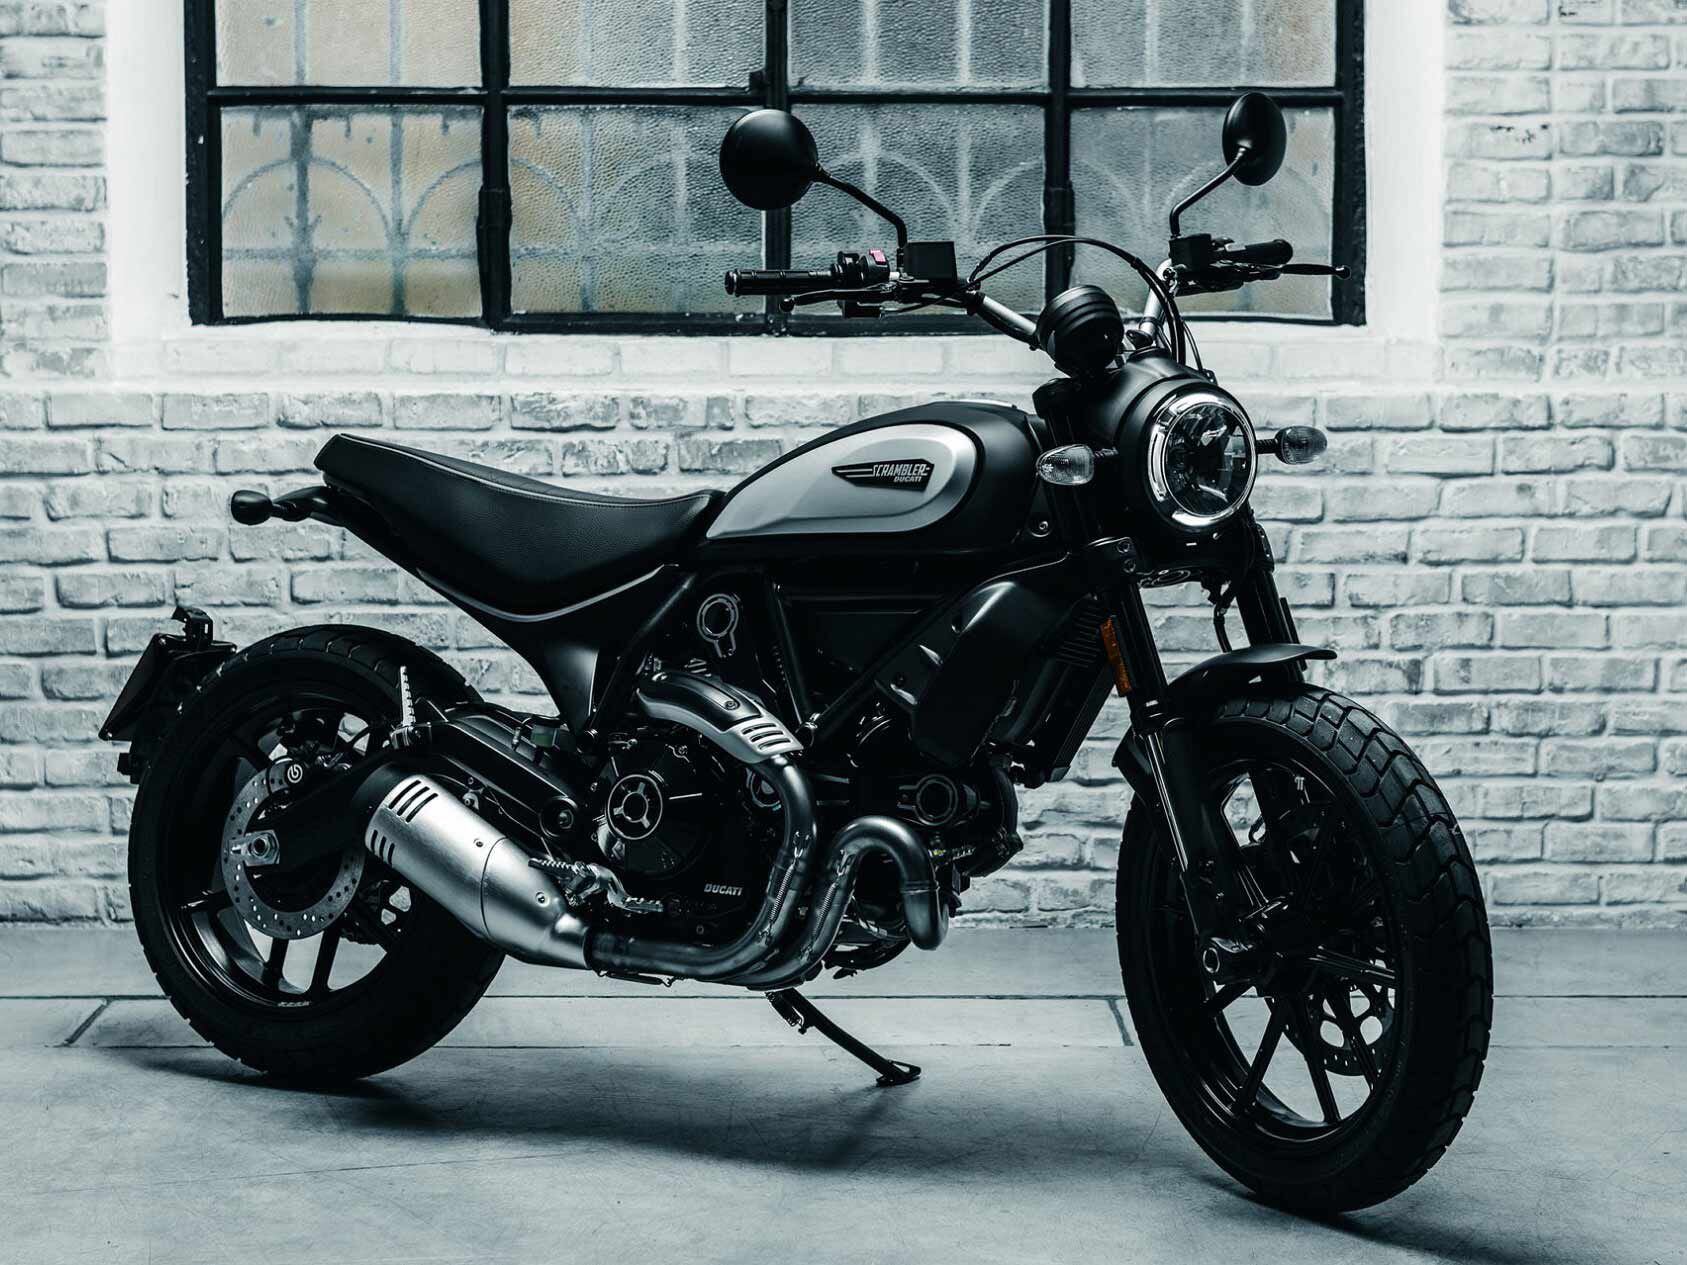 Ducati’s stand-alone Scrambler brand features no fewer than seven models in both 800cc and 1,100cc displacements. Pictured is the Icon Dark.